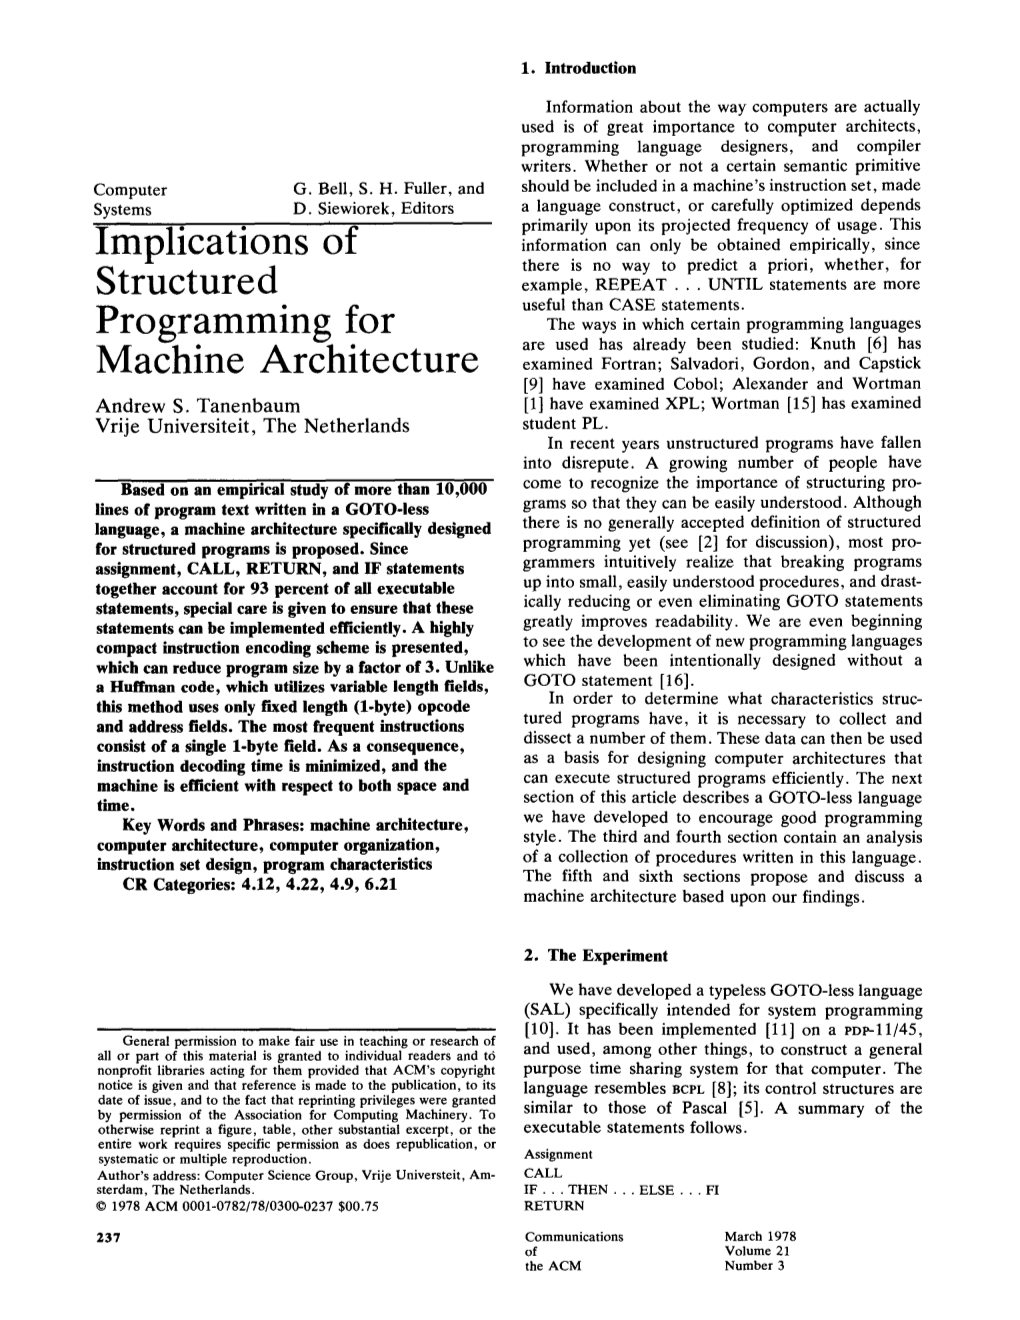 Implications of Structured Programming for Machine